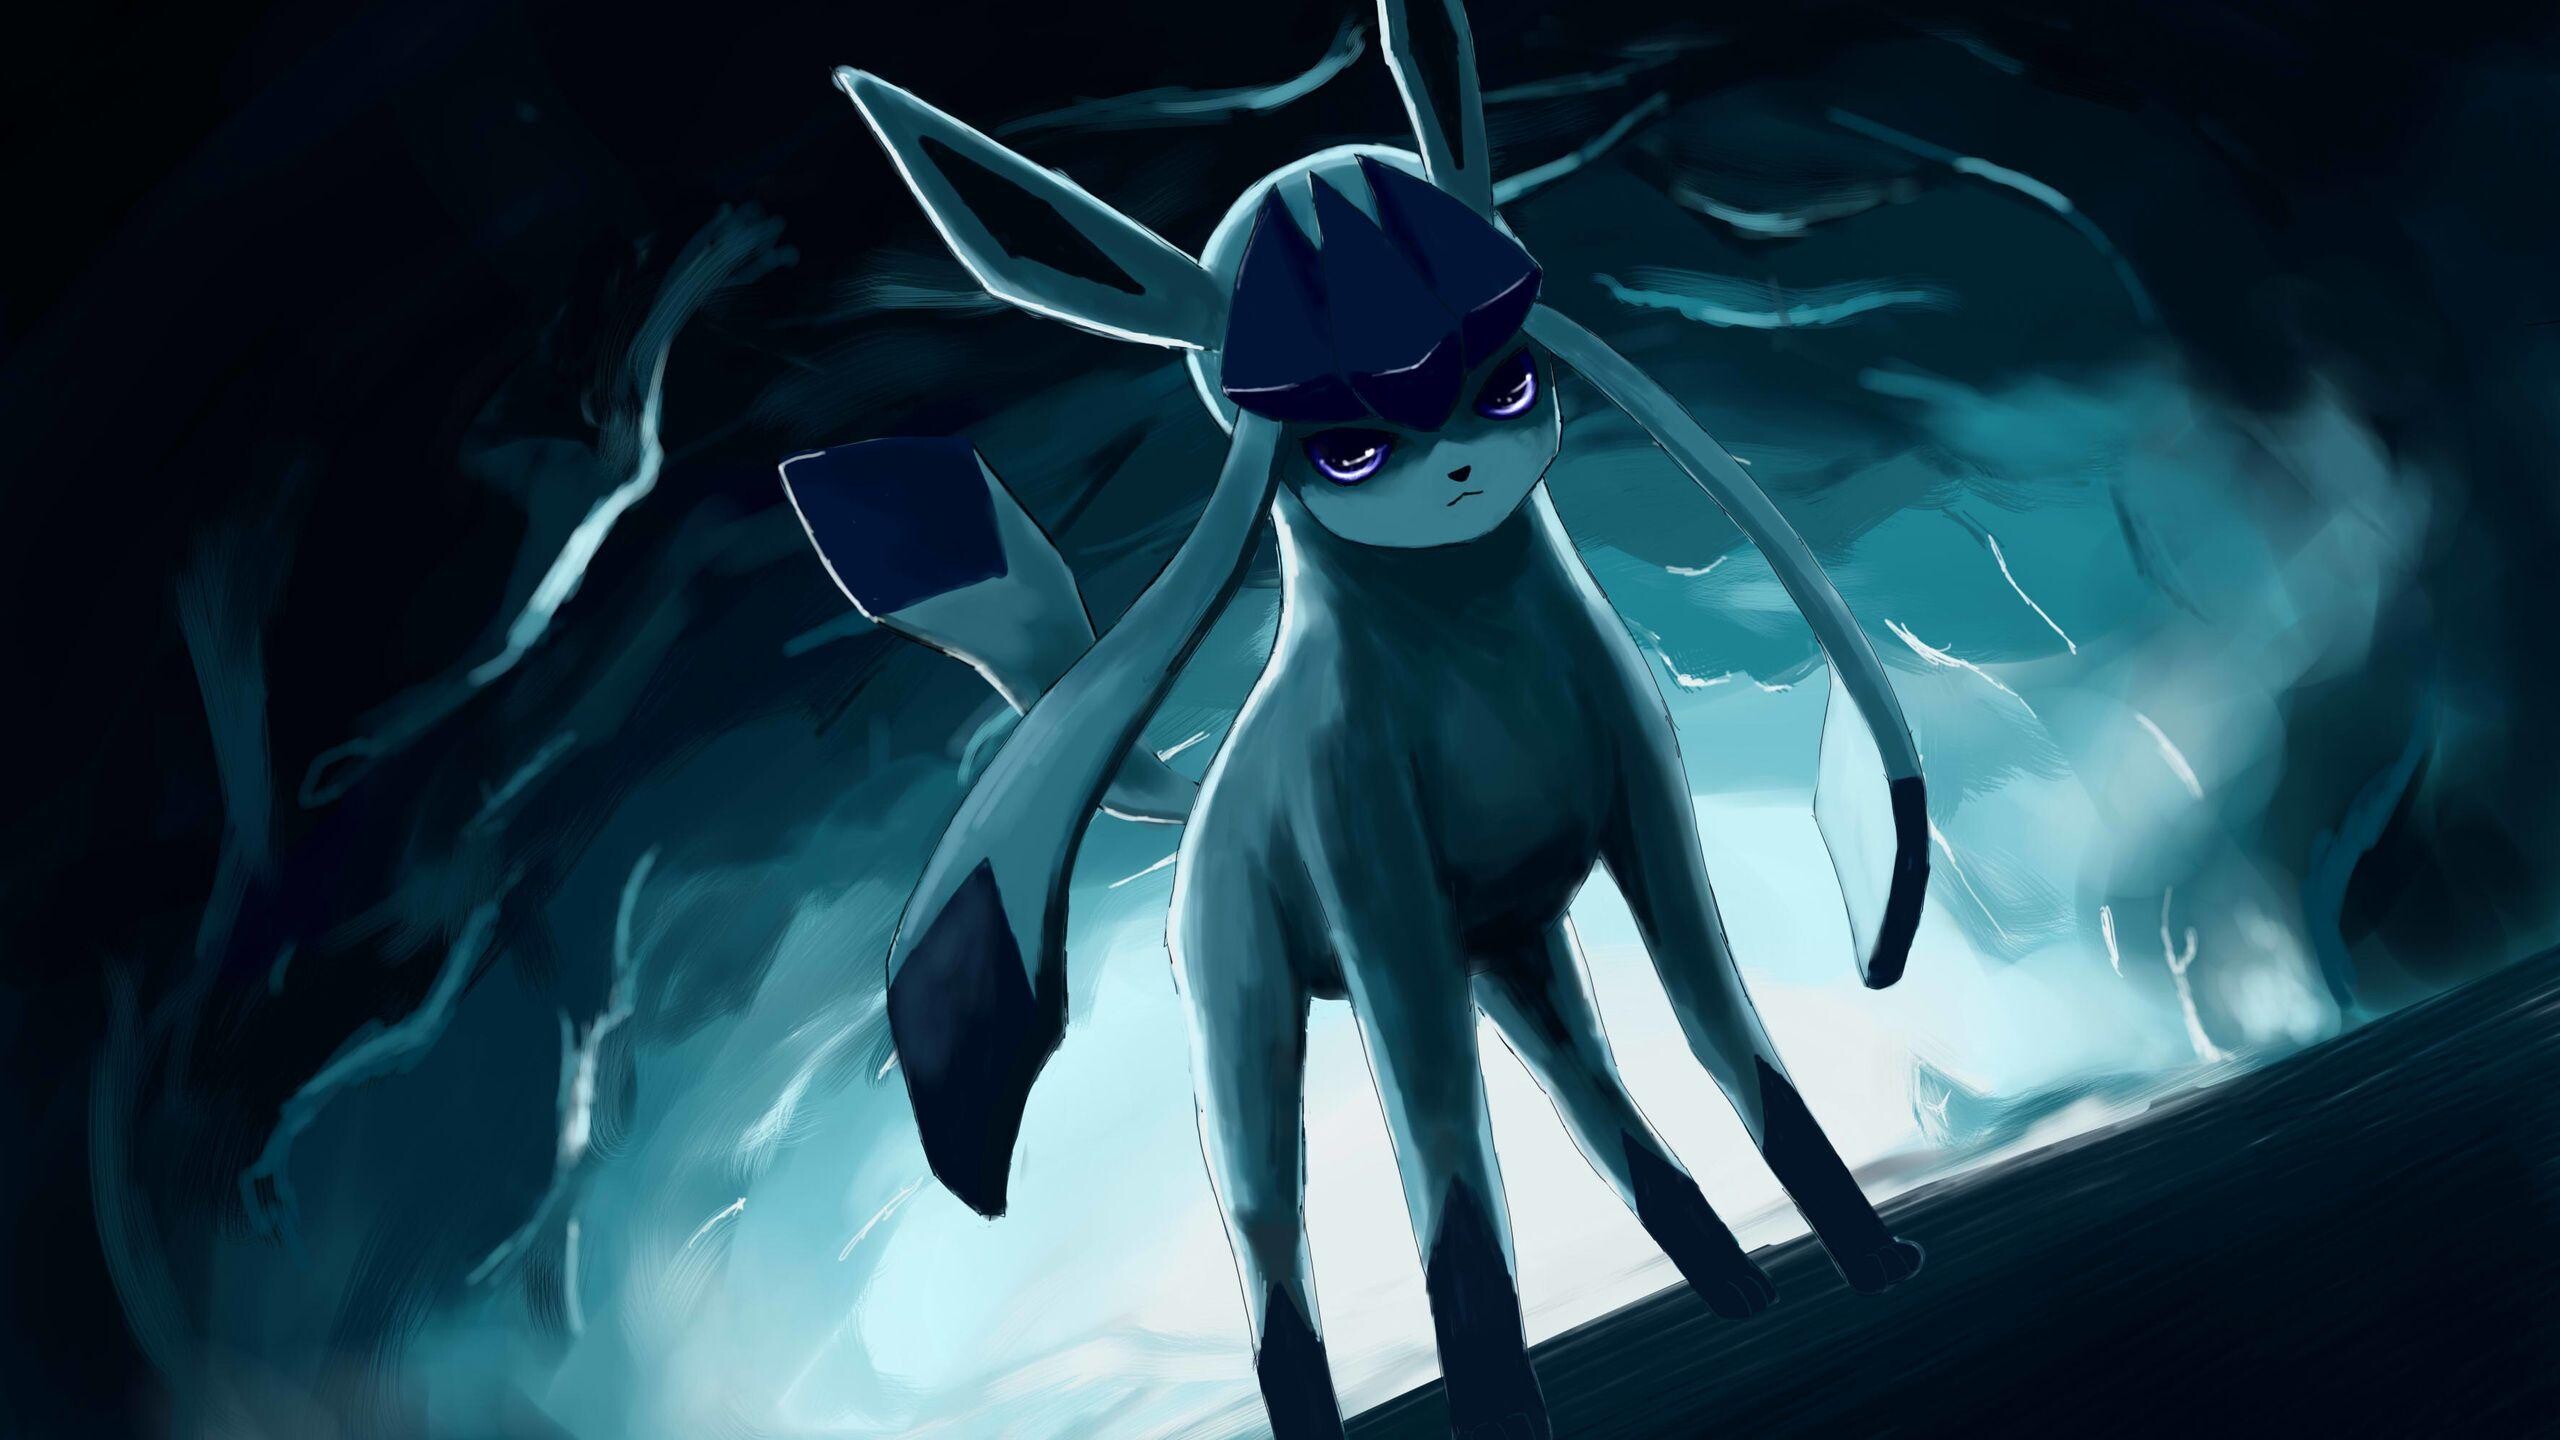 Glaceon Wallpapers